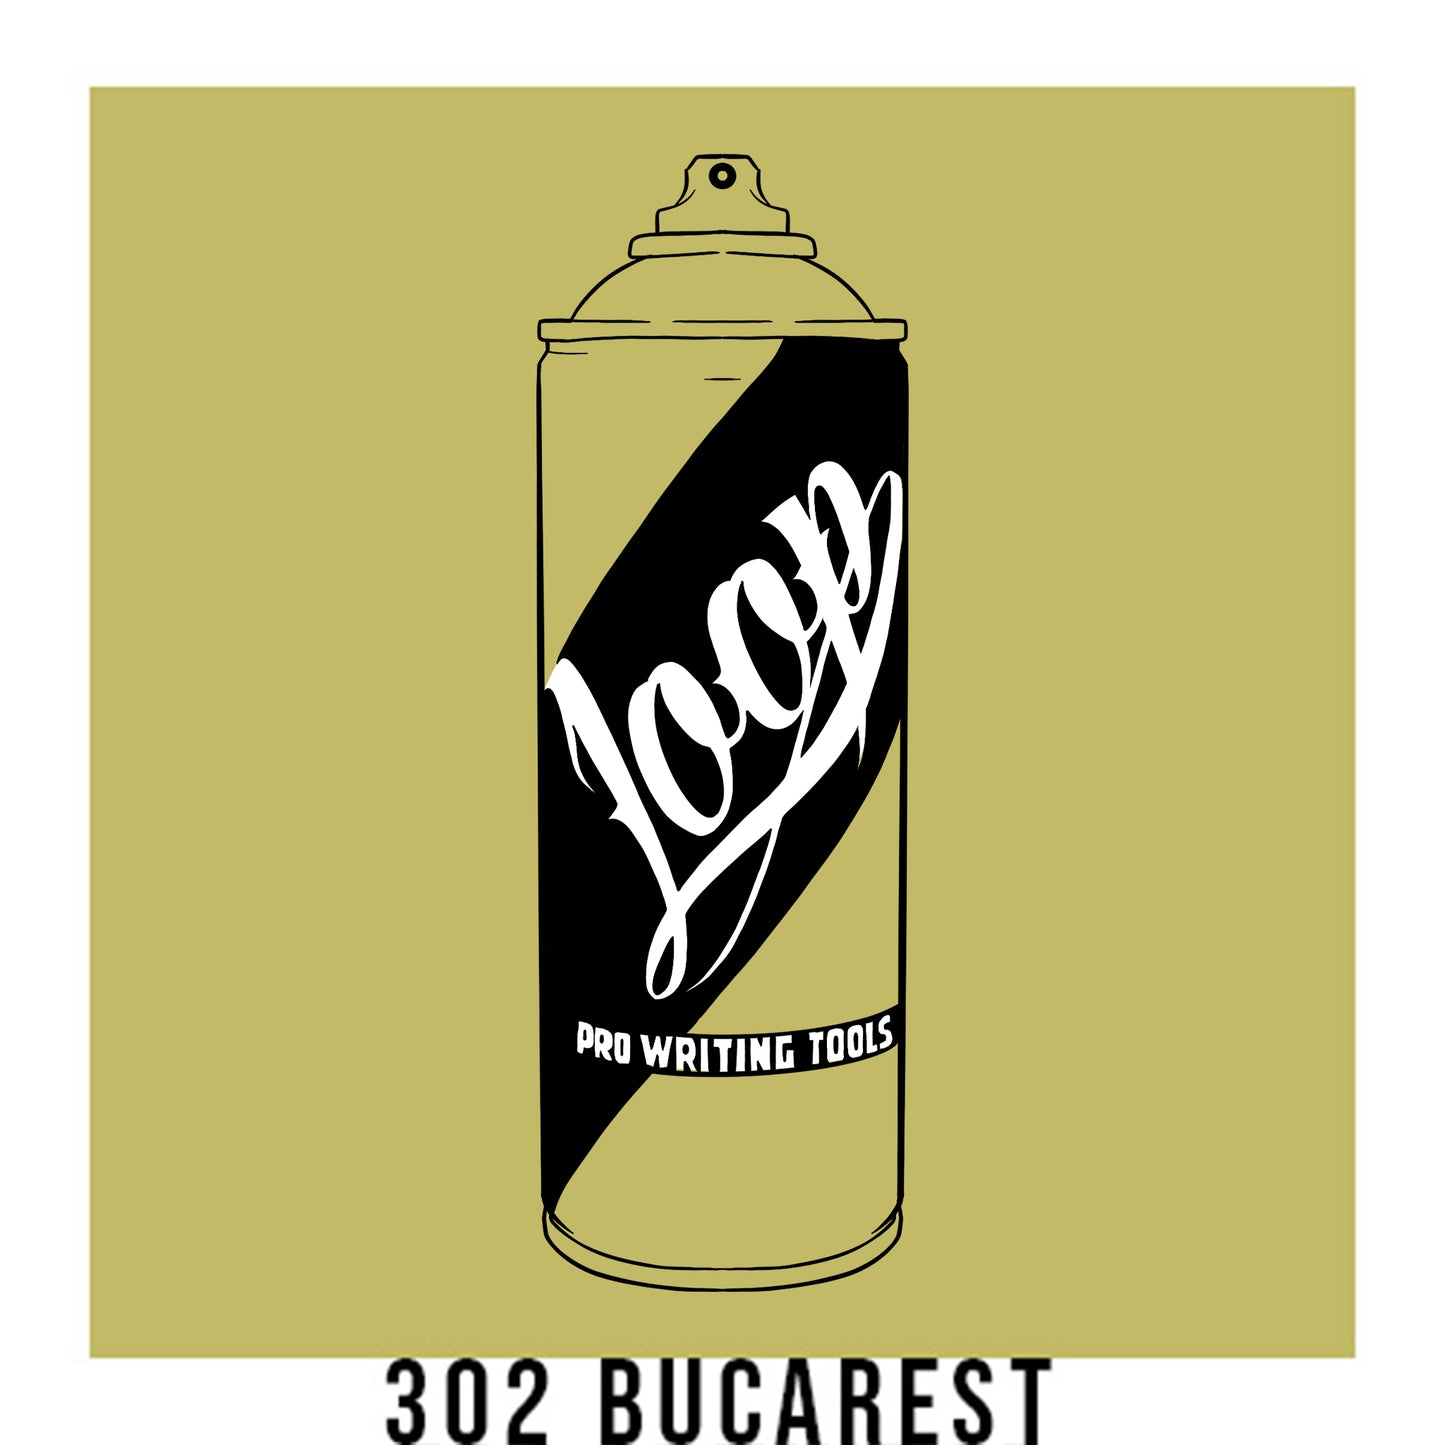 A black outline drawing of a golden olive spray paint can with the word "Loop" written on the face in script. The background is a color swatch of the same golden olive with a white border with the words "302 Bucarest" at the bottom.